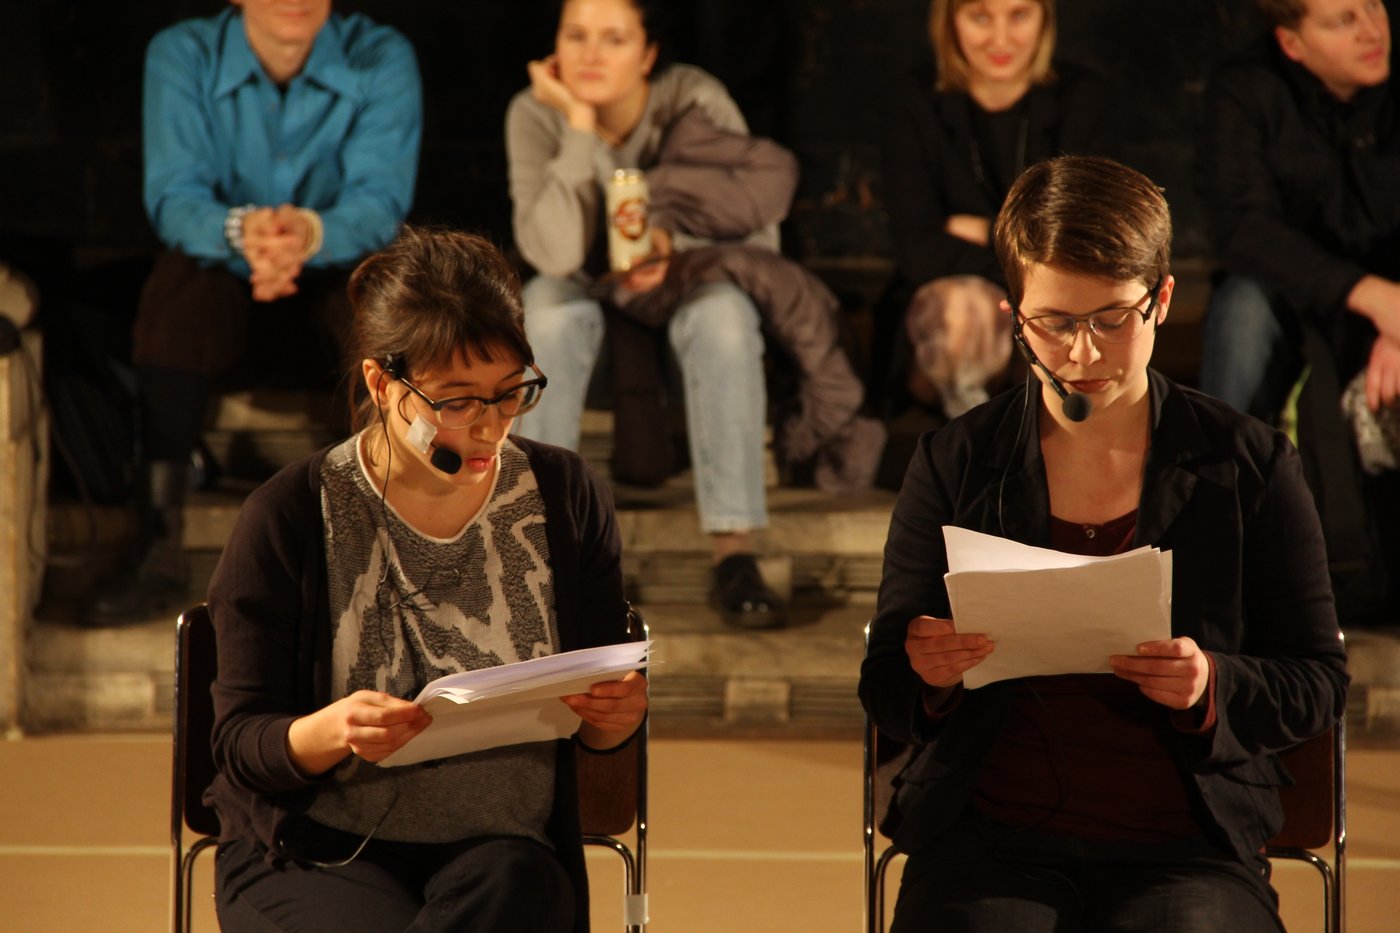 Two performers read from the manuscripts they hold in their hands